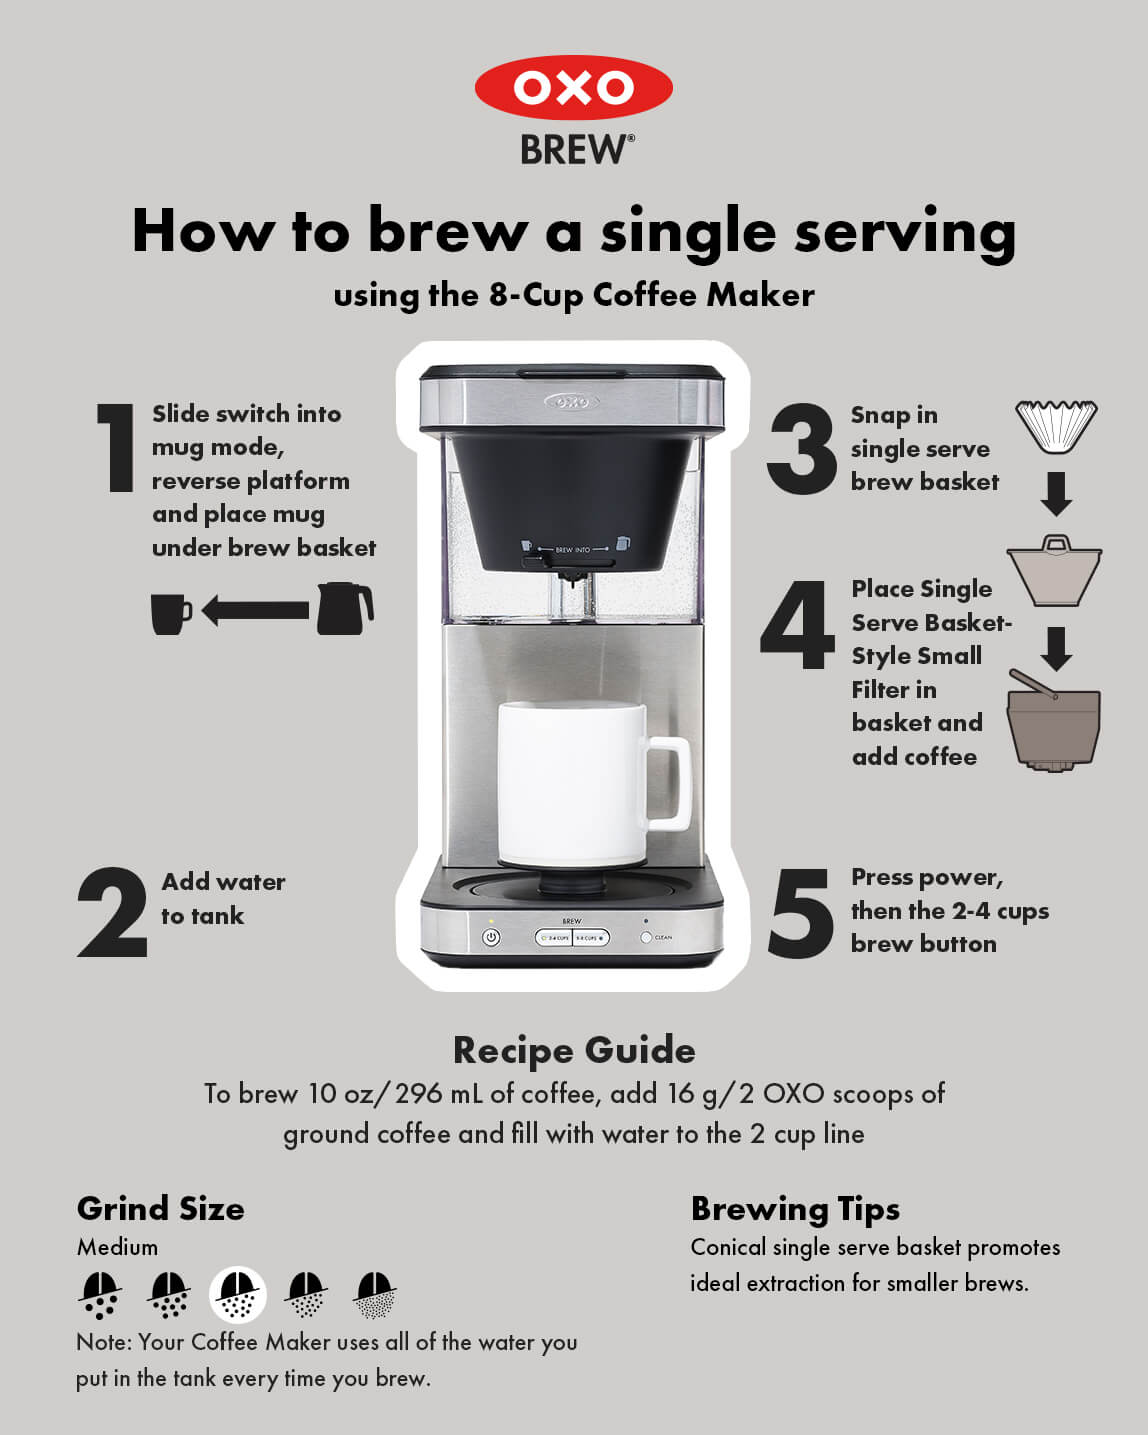 What Coffee To Use In A Drip Coffee Maker?